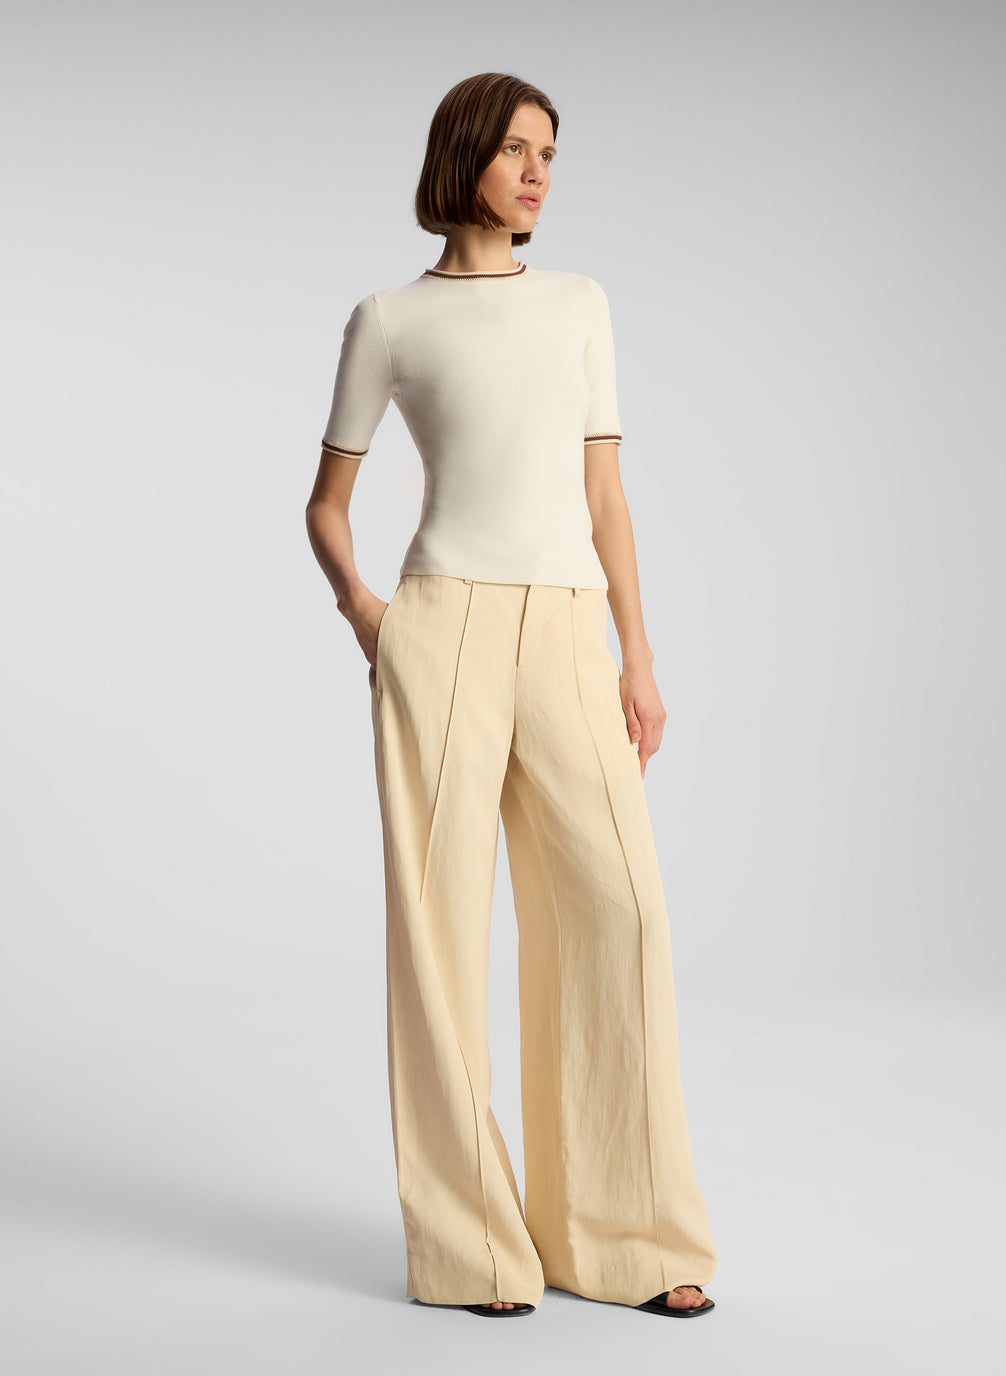 side view of woman wearing white top and beige pants